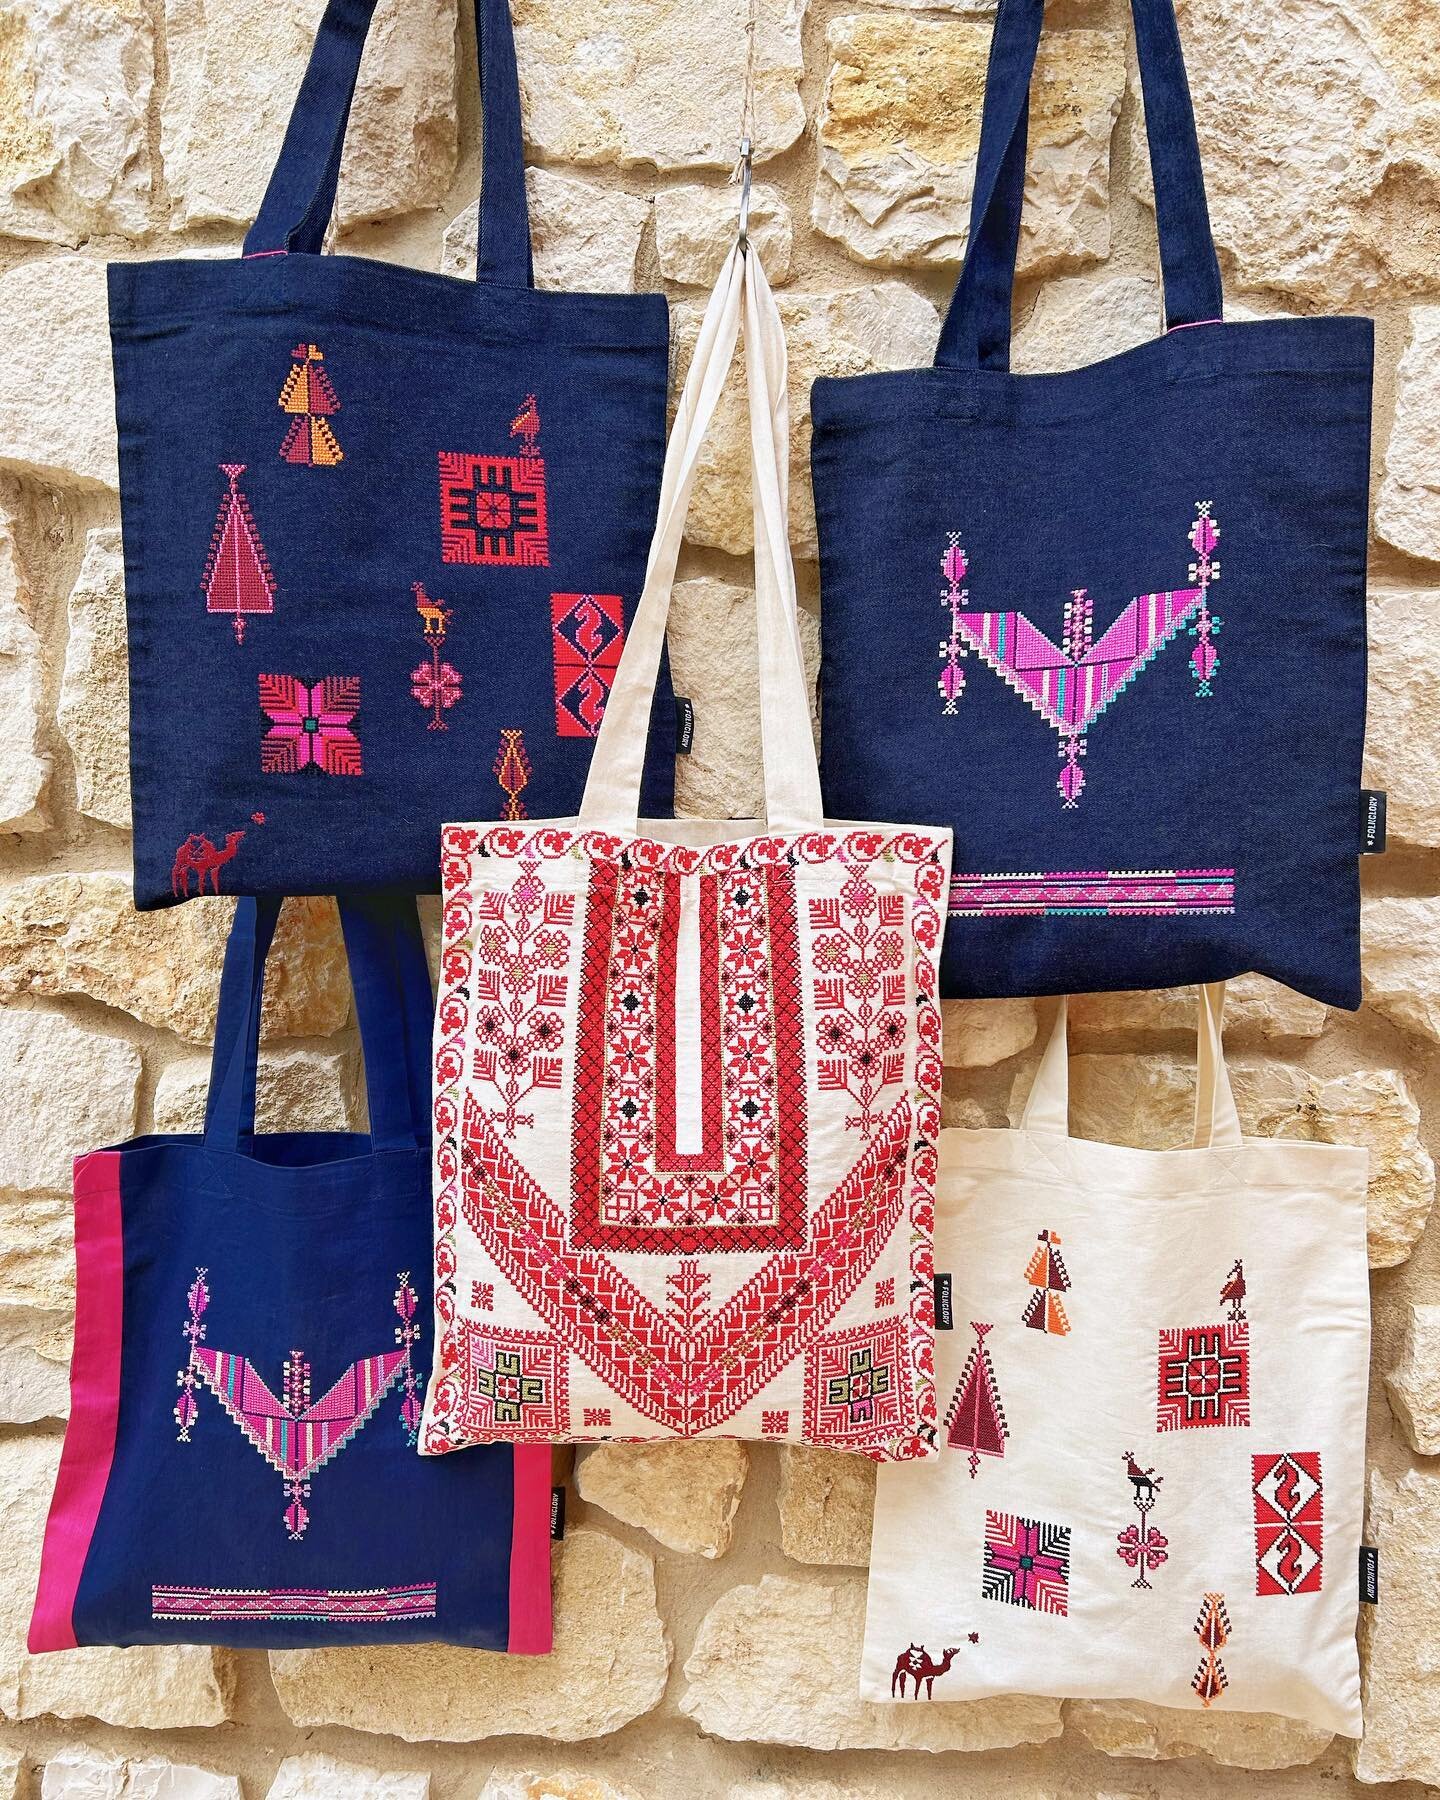 Our tote bags are now available on folkglory.com. Five unique designs with various Palestinian motifs. Also available in bundles of two, three and five. Designed by FolkGlory and machine embroidered and made in Jordan. #totebag #tatreez #palestine #r